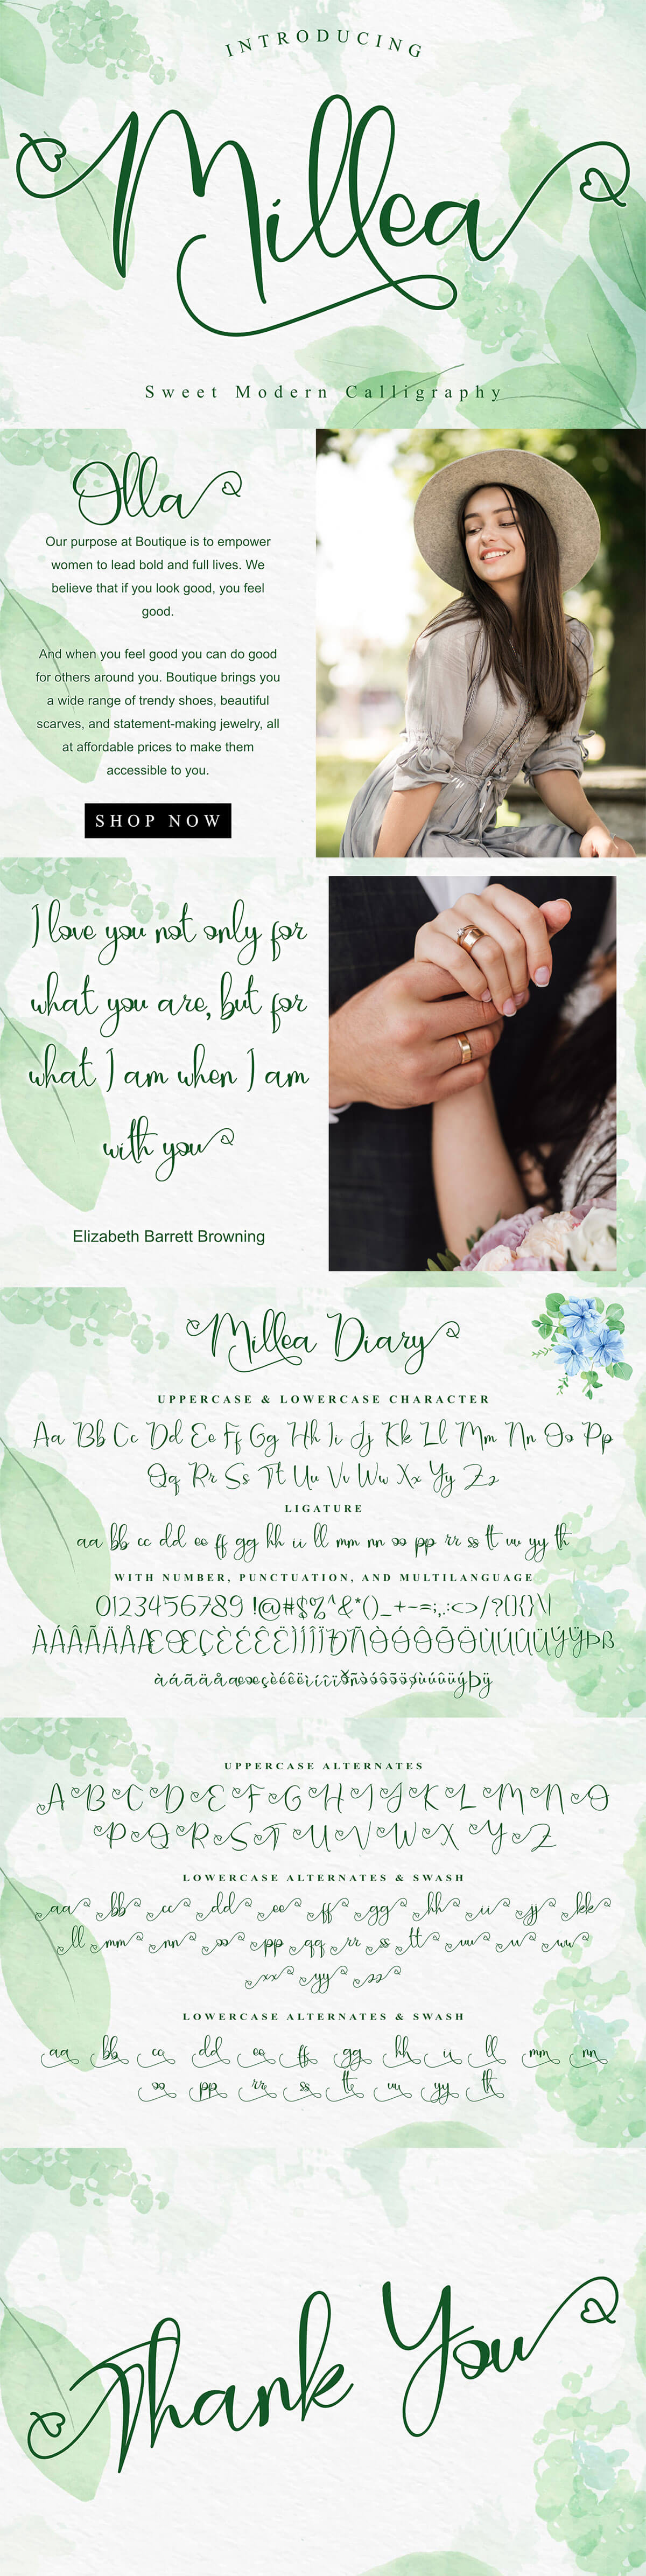 Free Millea Diary Calligraphy Font